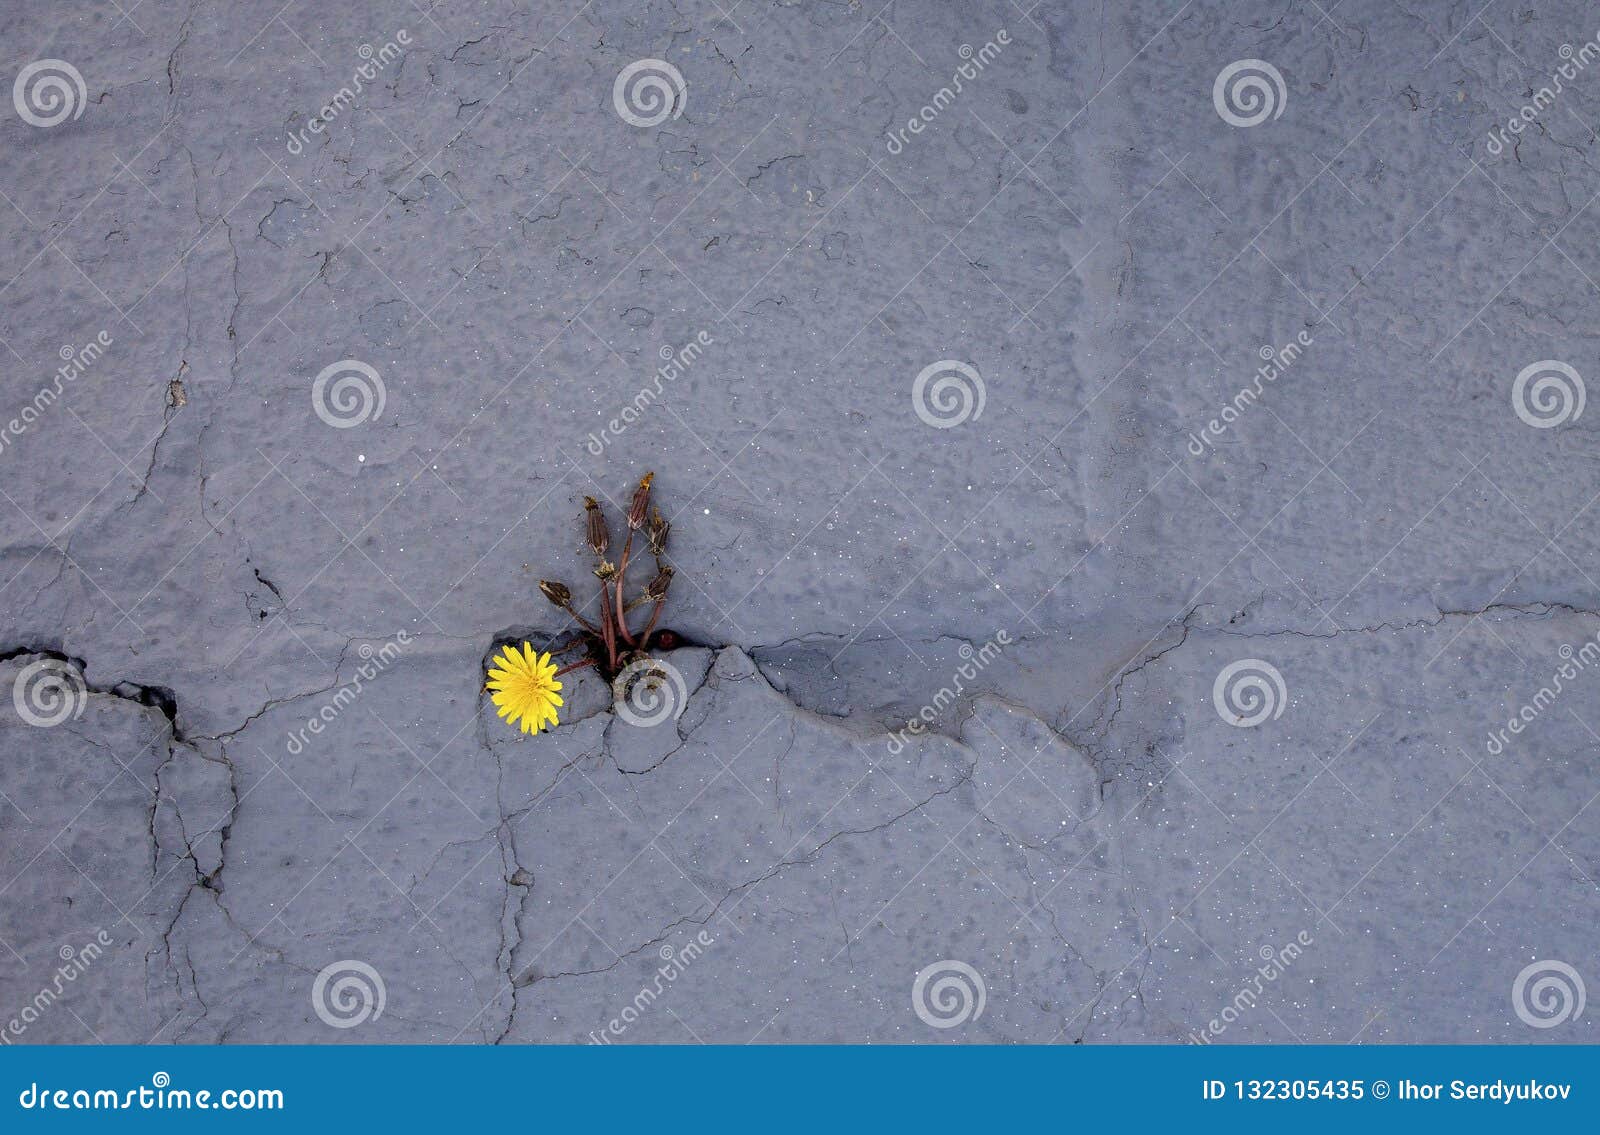 dandelion sprouts through the concrete floor. the  of struggle and resistance. concept: don `t give up no matter what,